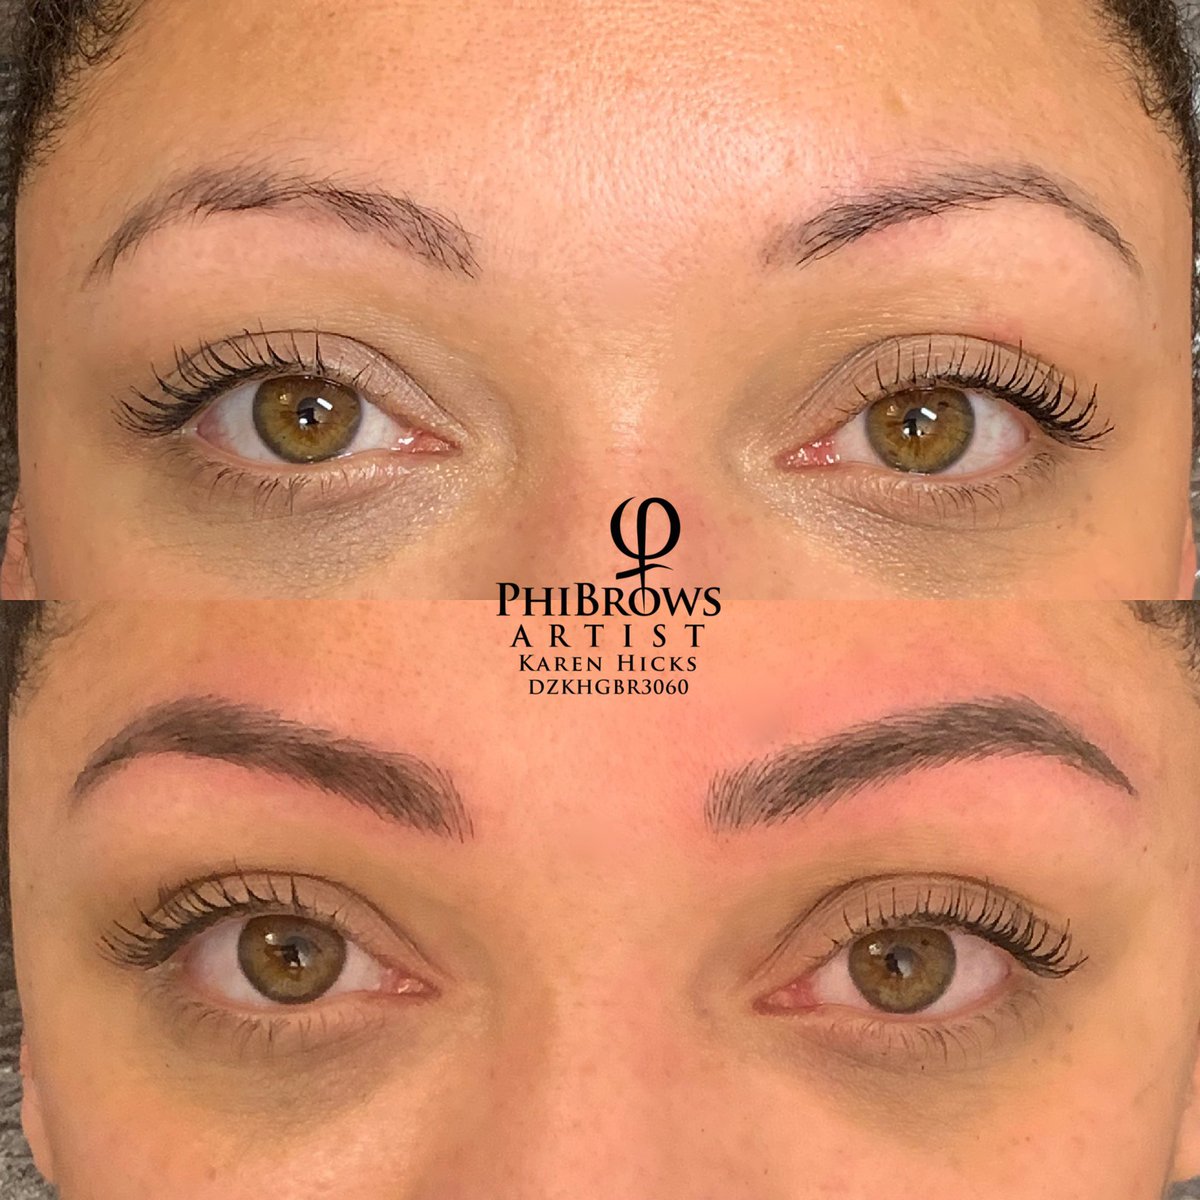 Creating a fuller brow.
#phibrows #phibrowstylist #microbladingeyebrows #microblading #eyebrows #hairstrokebrows #semipermanenteyebrows #natural #bblogger #surrey #london #caterham #croydon #reigate #redhill #microbladingsurrey #tattoobrows